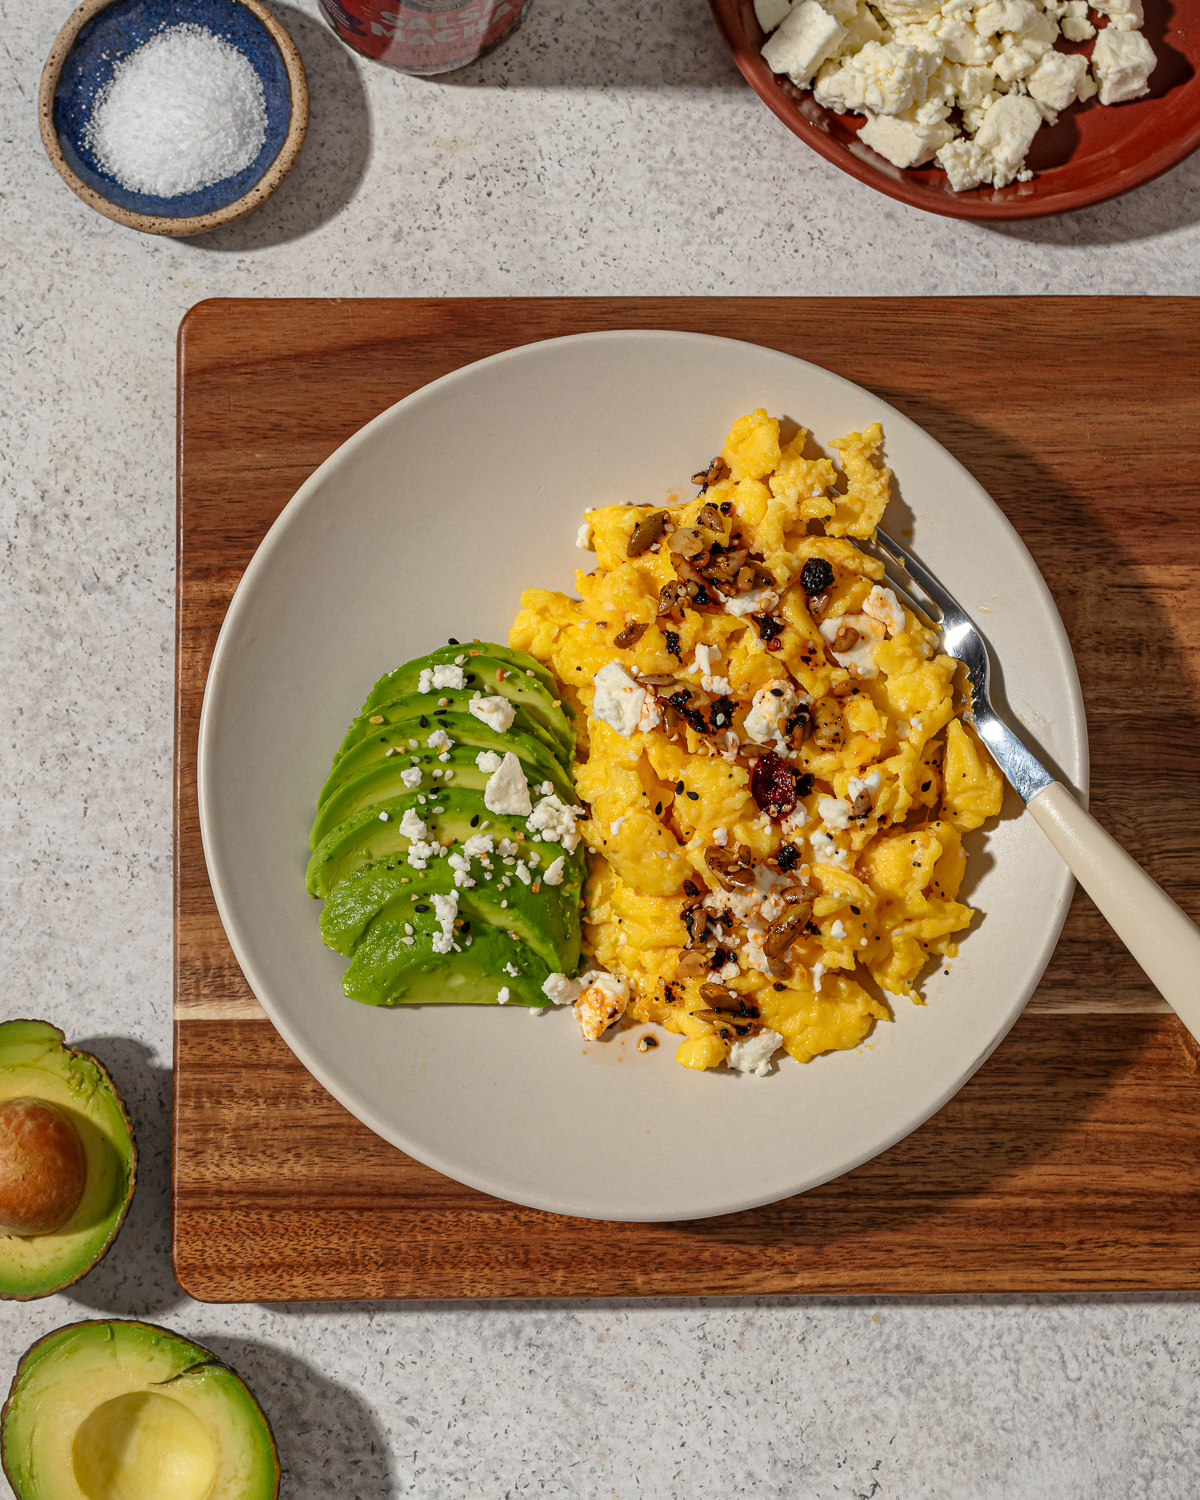 A serving of scrambled eggs without milk on a cutting board with sides and toppings.